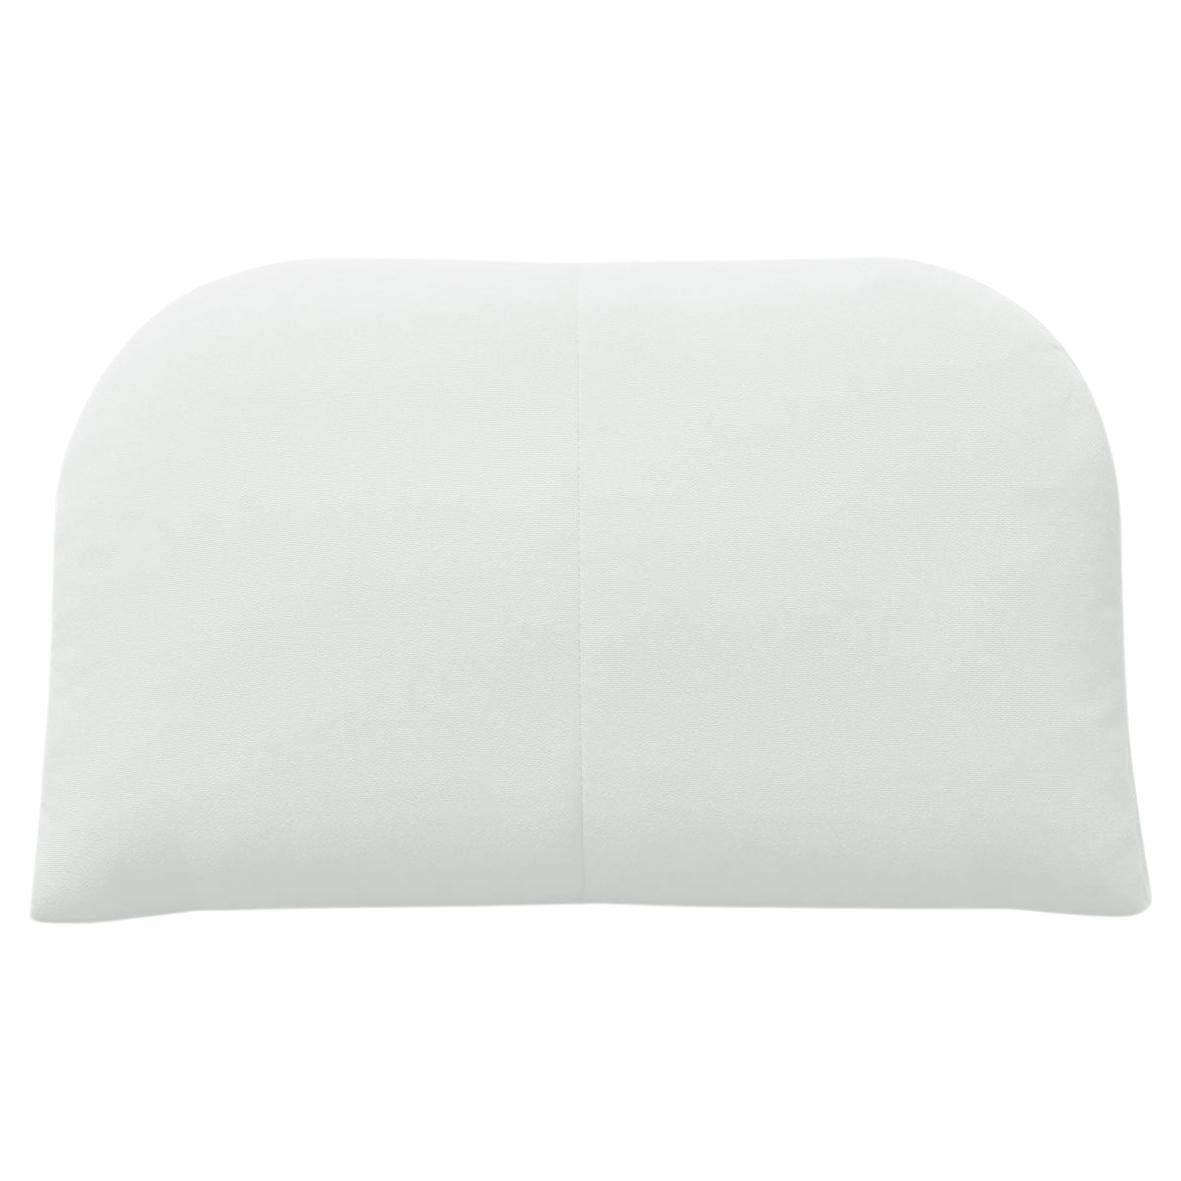 Bend Goods - Arc Throw Pillow in White Sunbrella For Sale